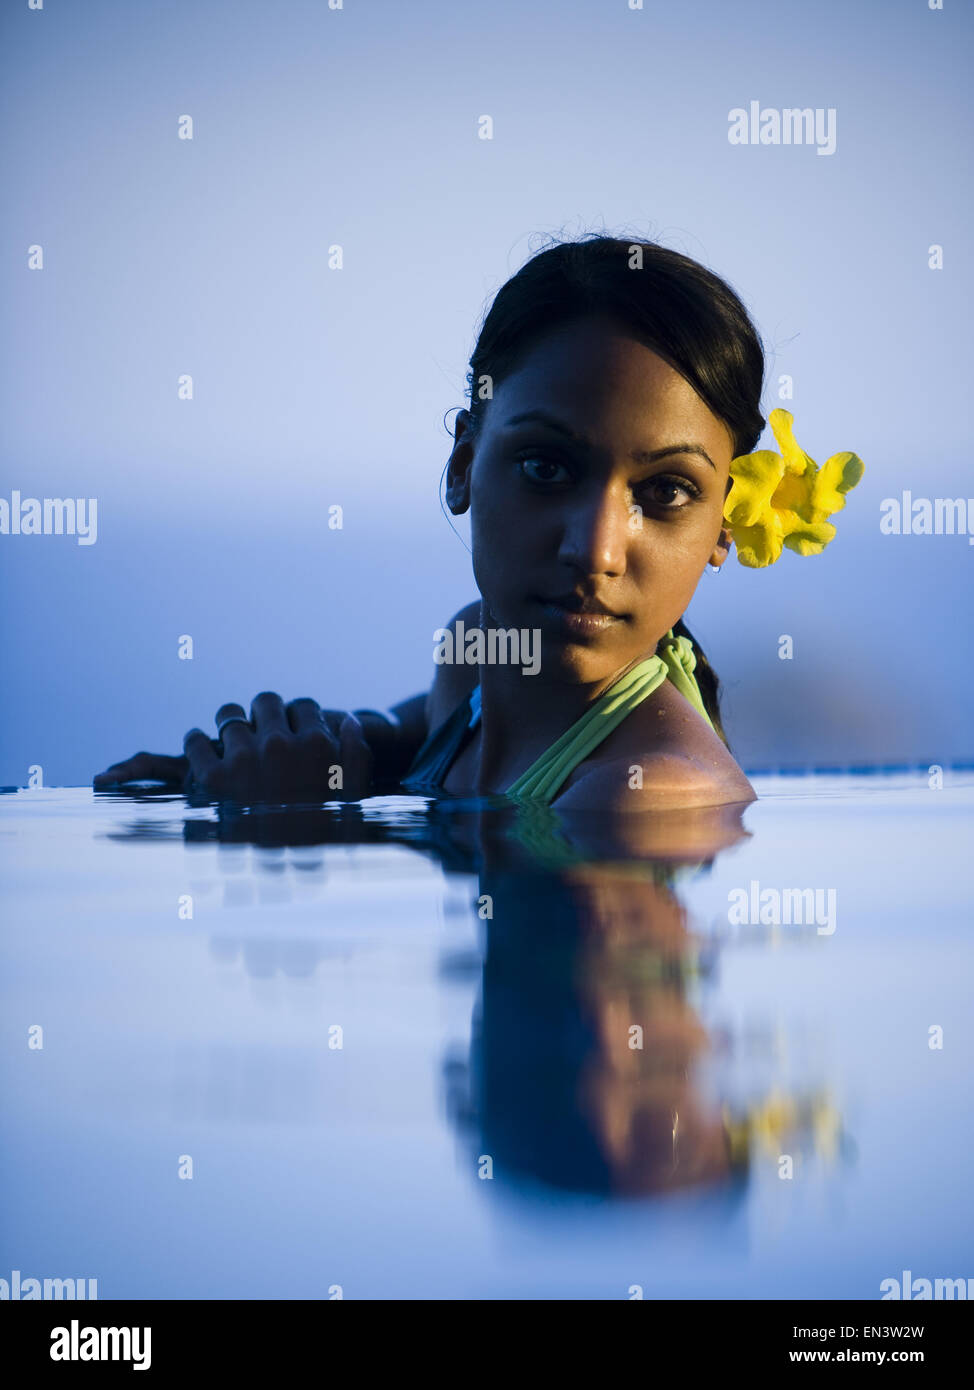 Portrait of a young woman in a swimming pool Stock Photo